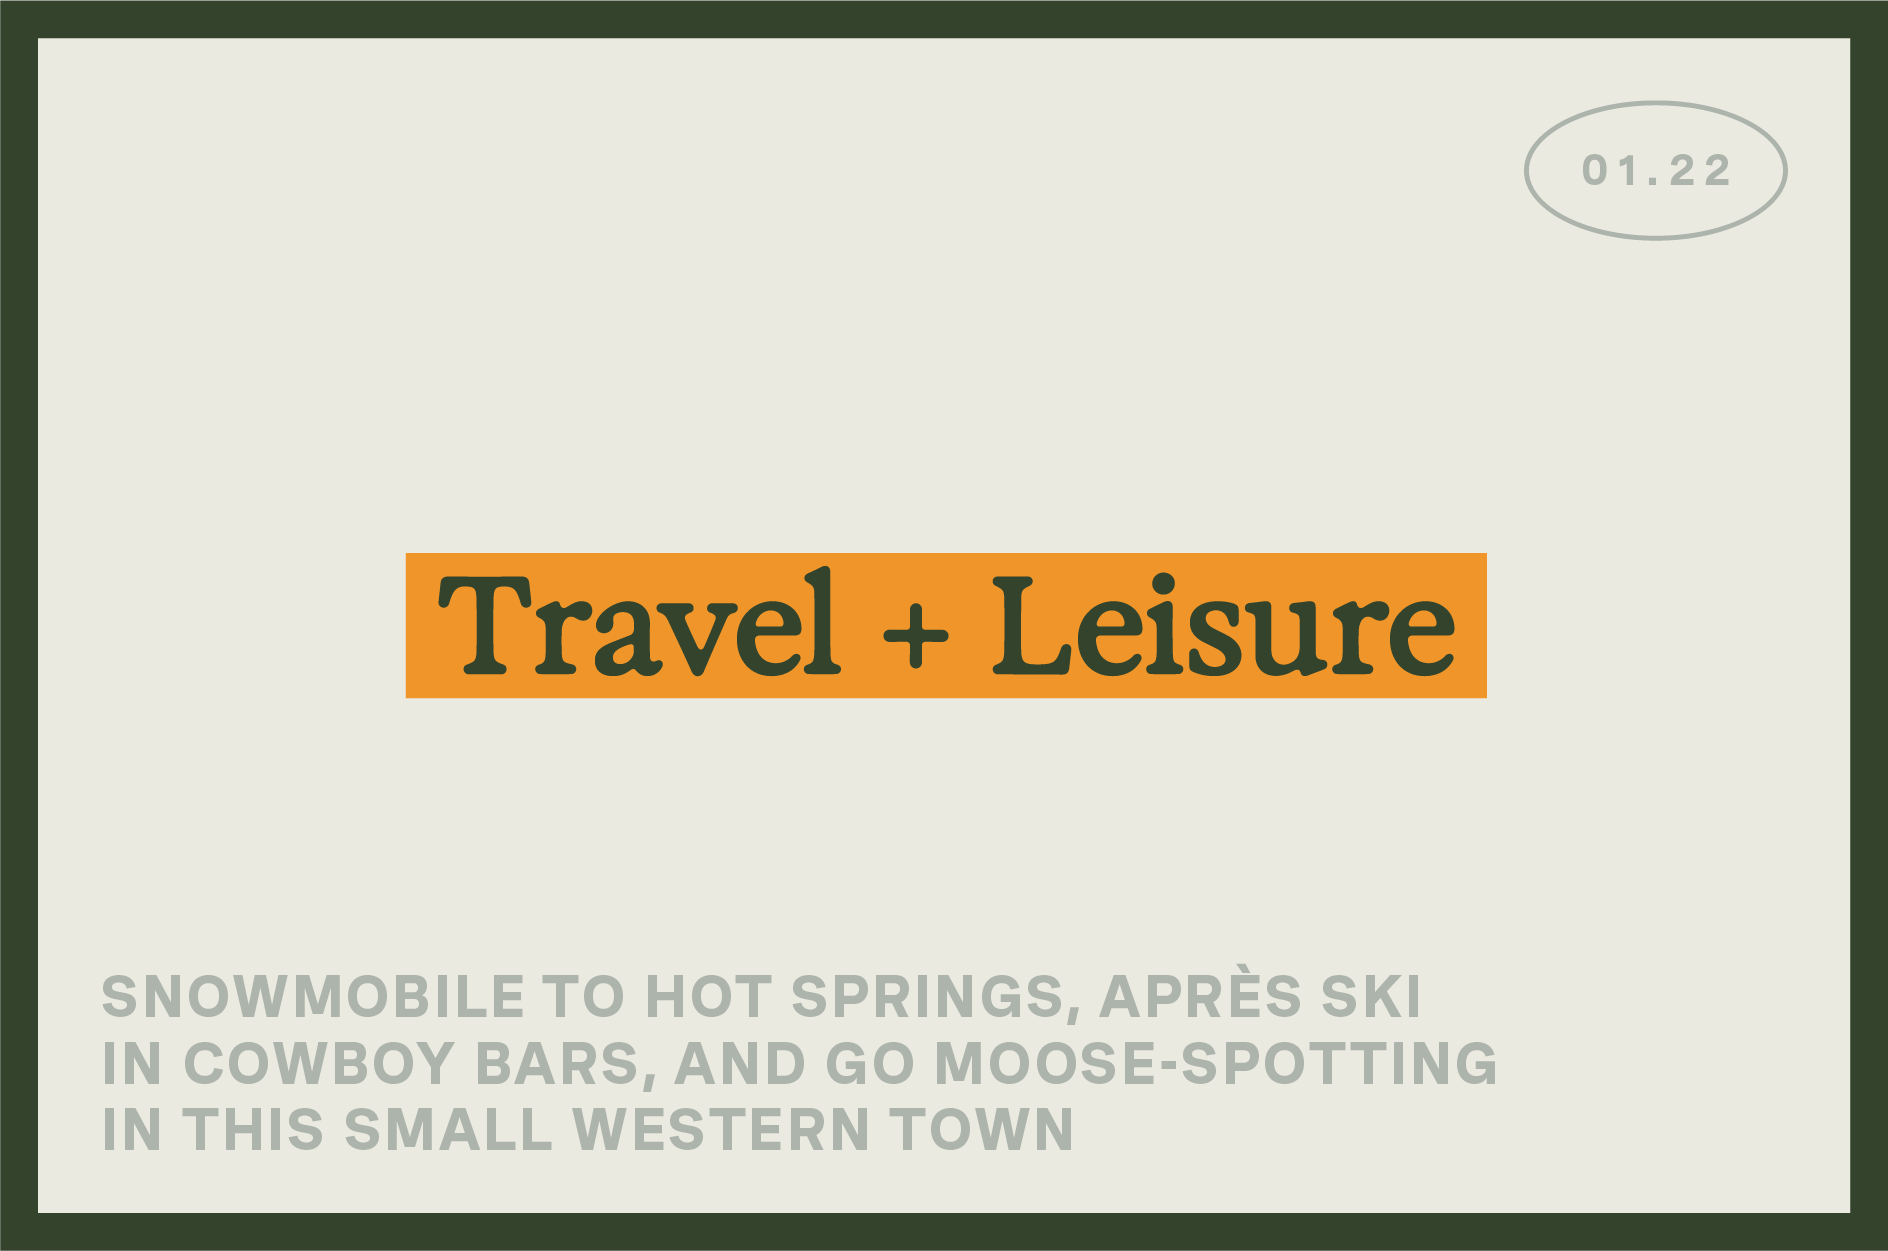 Banner showcases "Travel + Leisure" with the headline "Snowmobile to Hot Spring" and more.